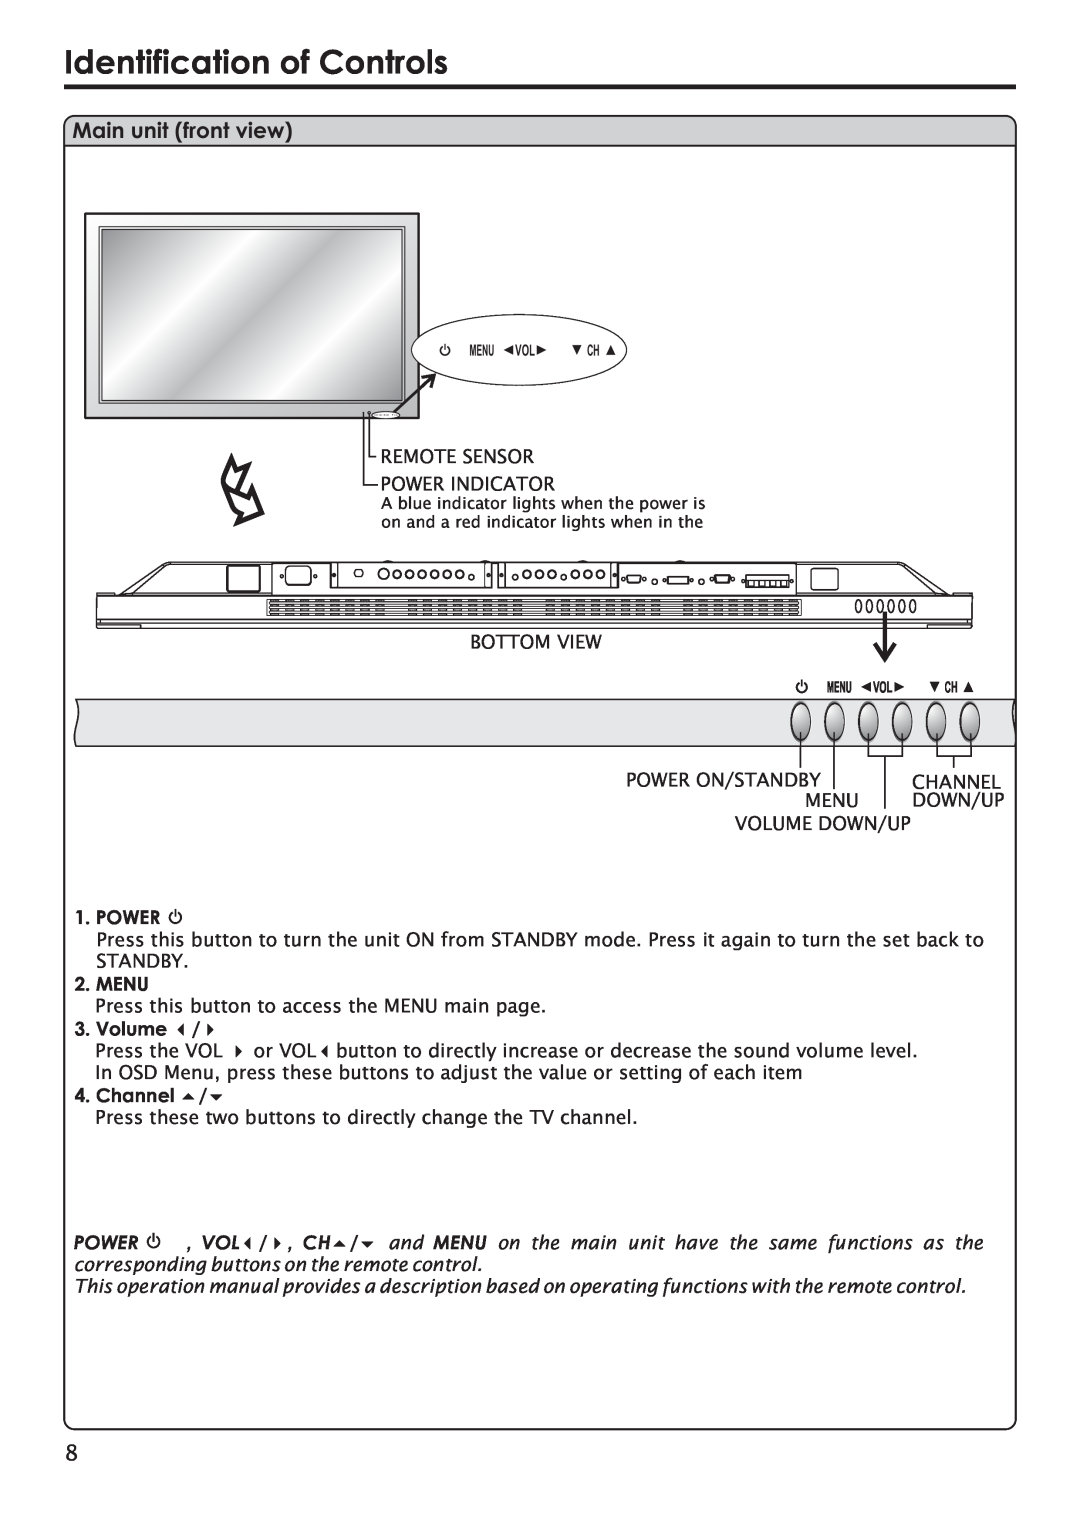 Primate Systems PDP TV manual Identification of Controls, Main unit front view, Power, Menu, Volume, Channel 